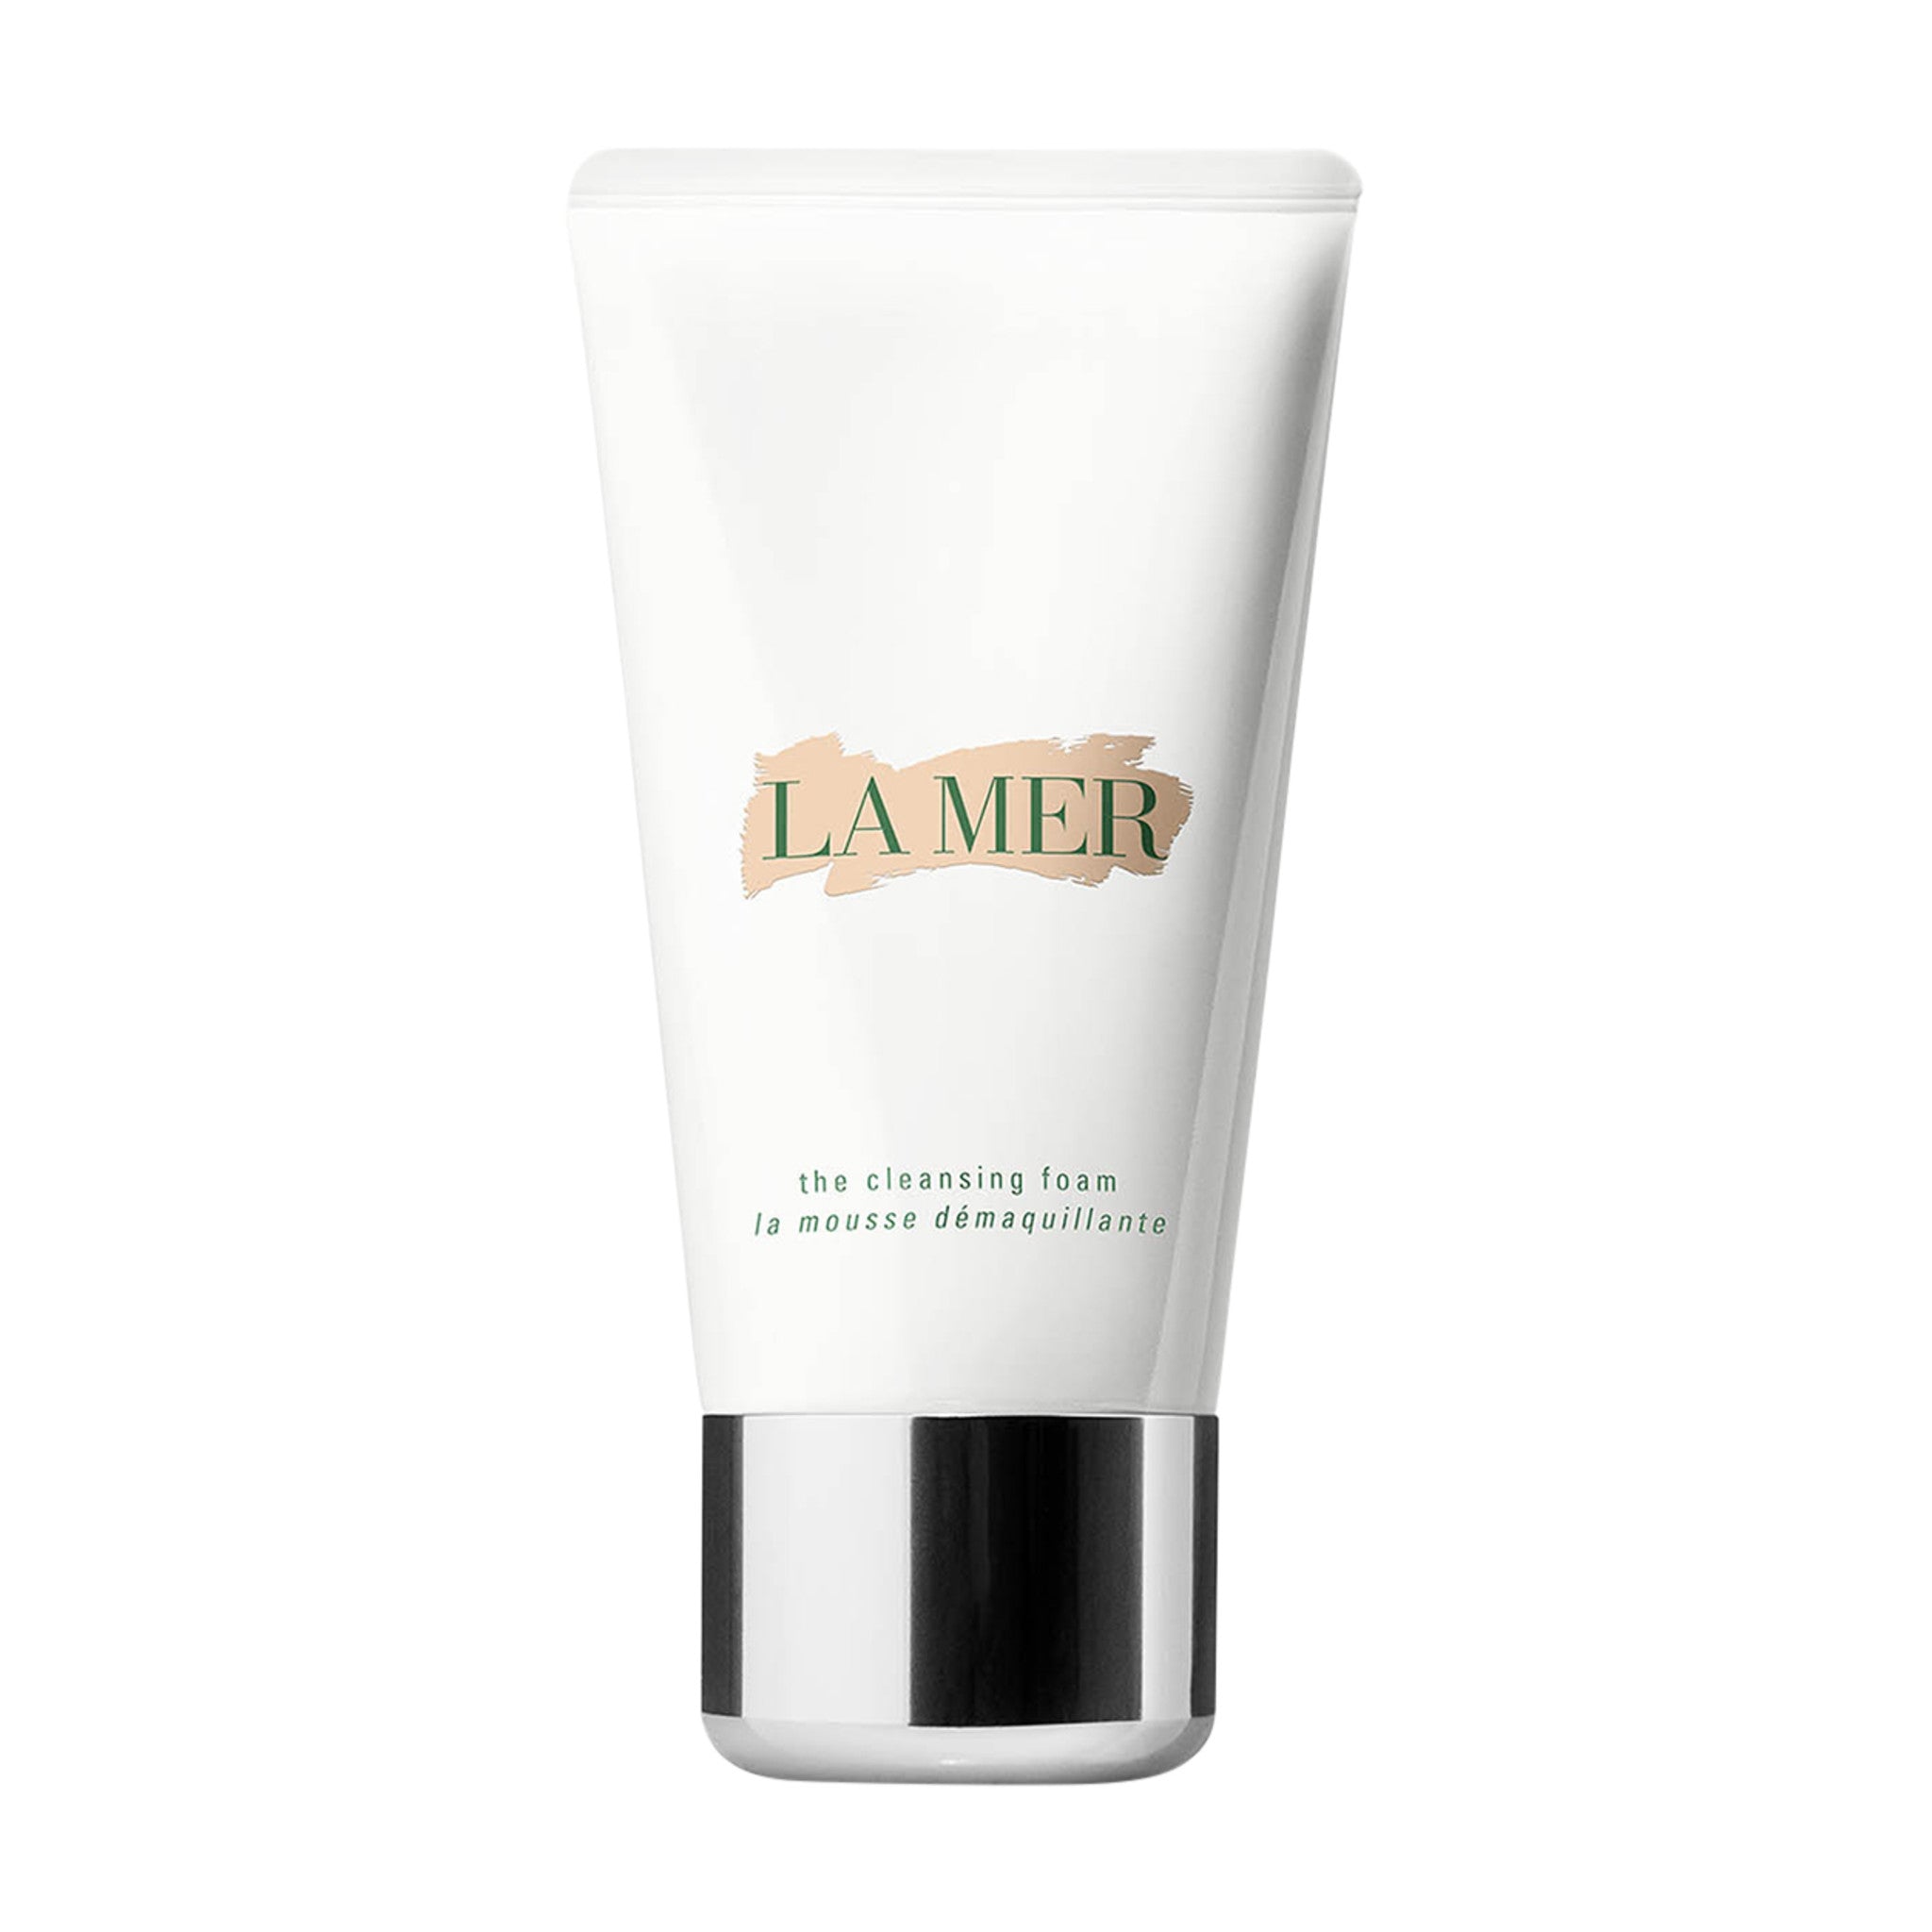 La Mer The Cleansing Foam Size variant: 125 ML main image.